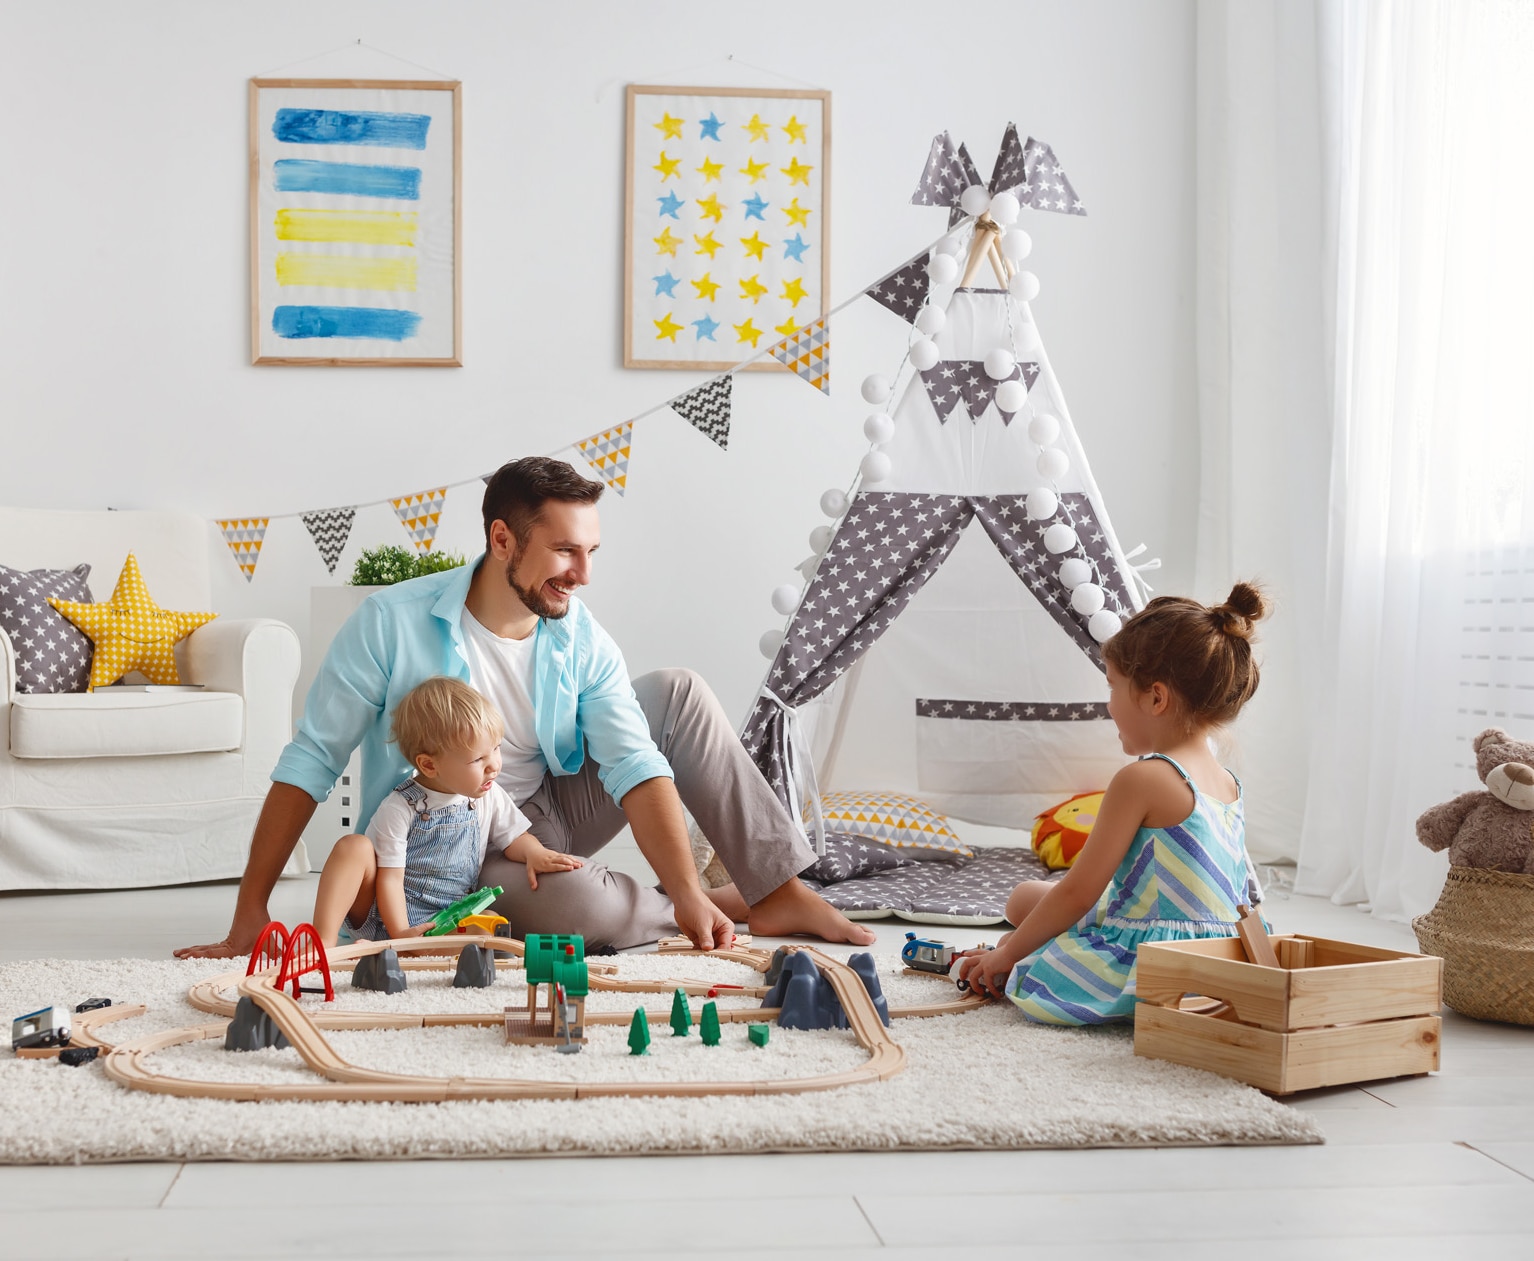 family father and children play a toy railway in the playroom
; Shutterstock ID 1033143271; purchase_order: -; job: -; client: -; other: -